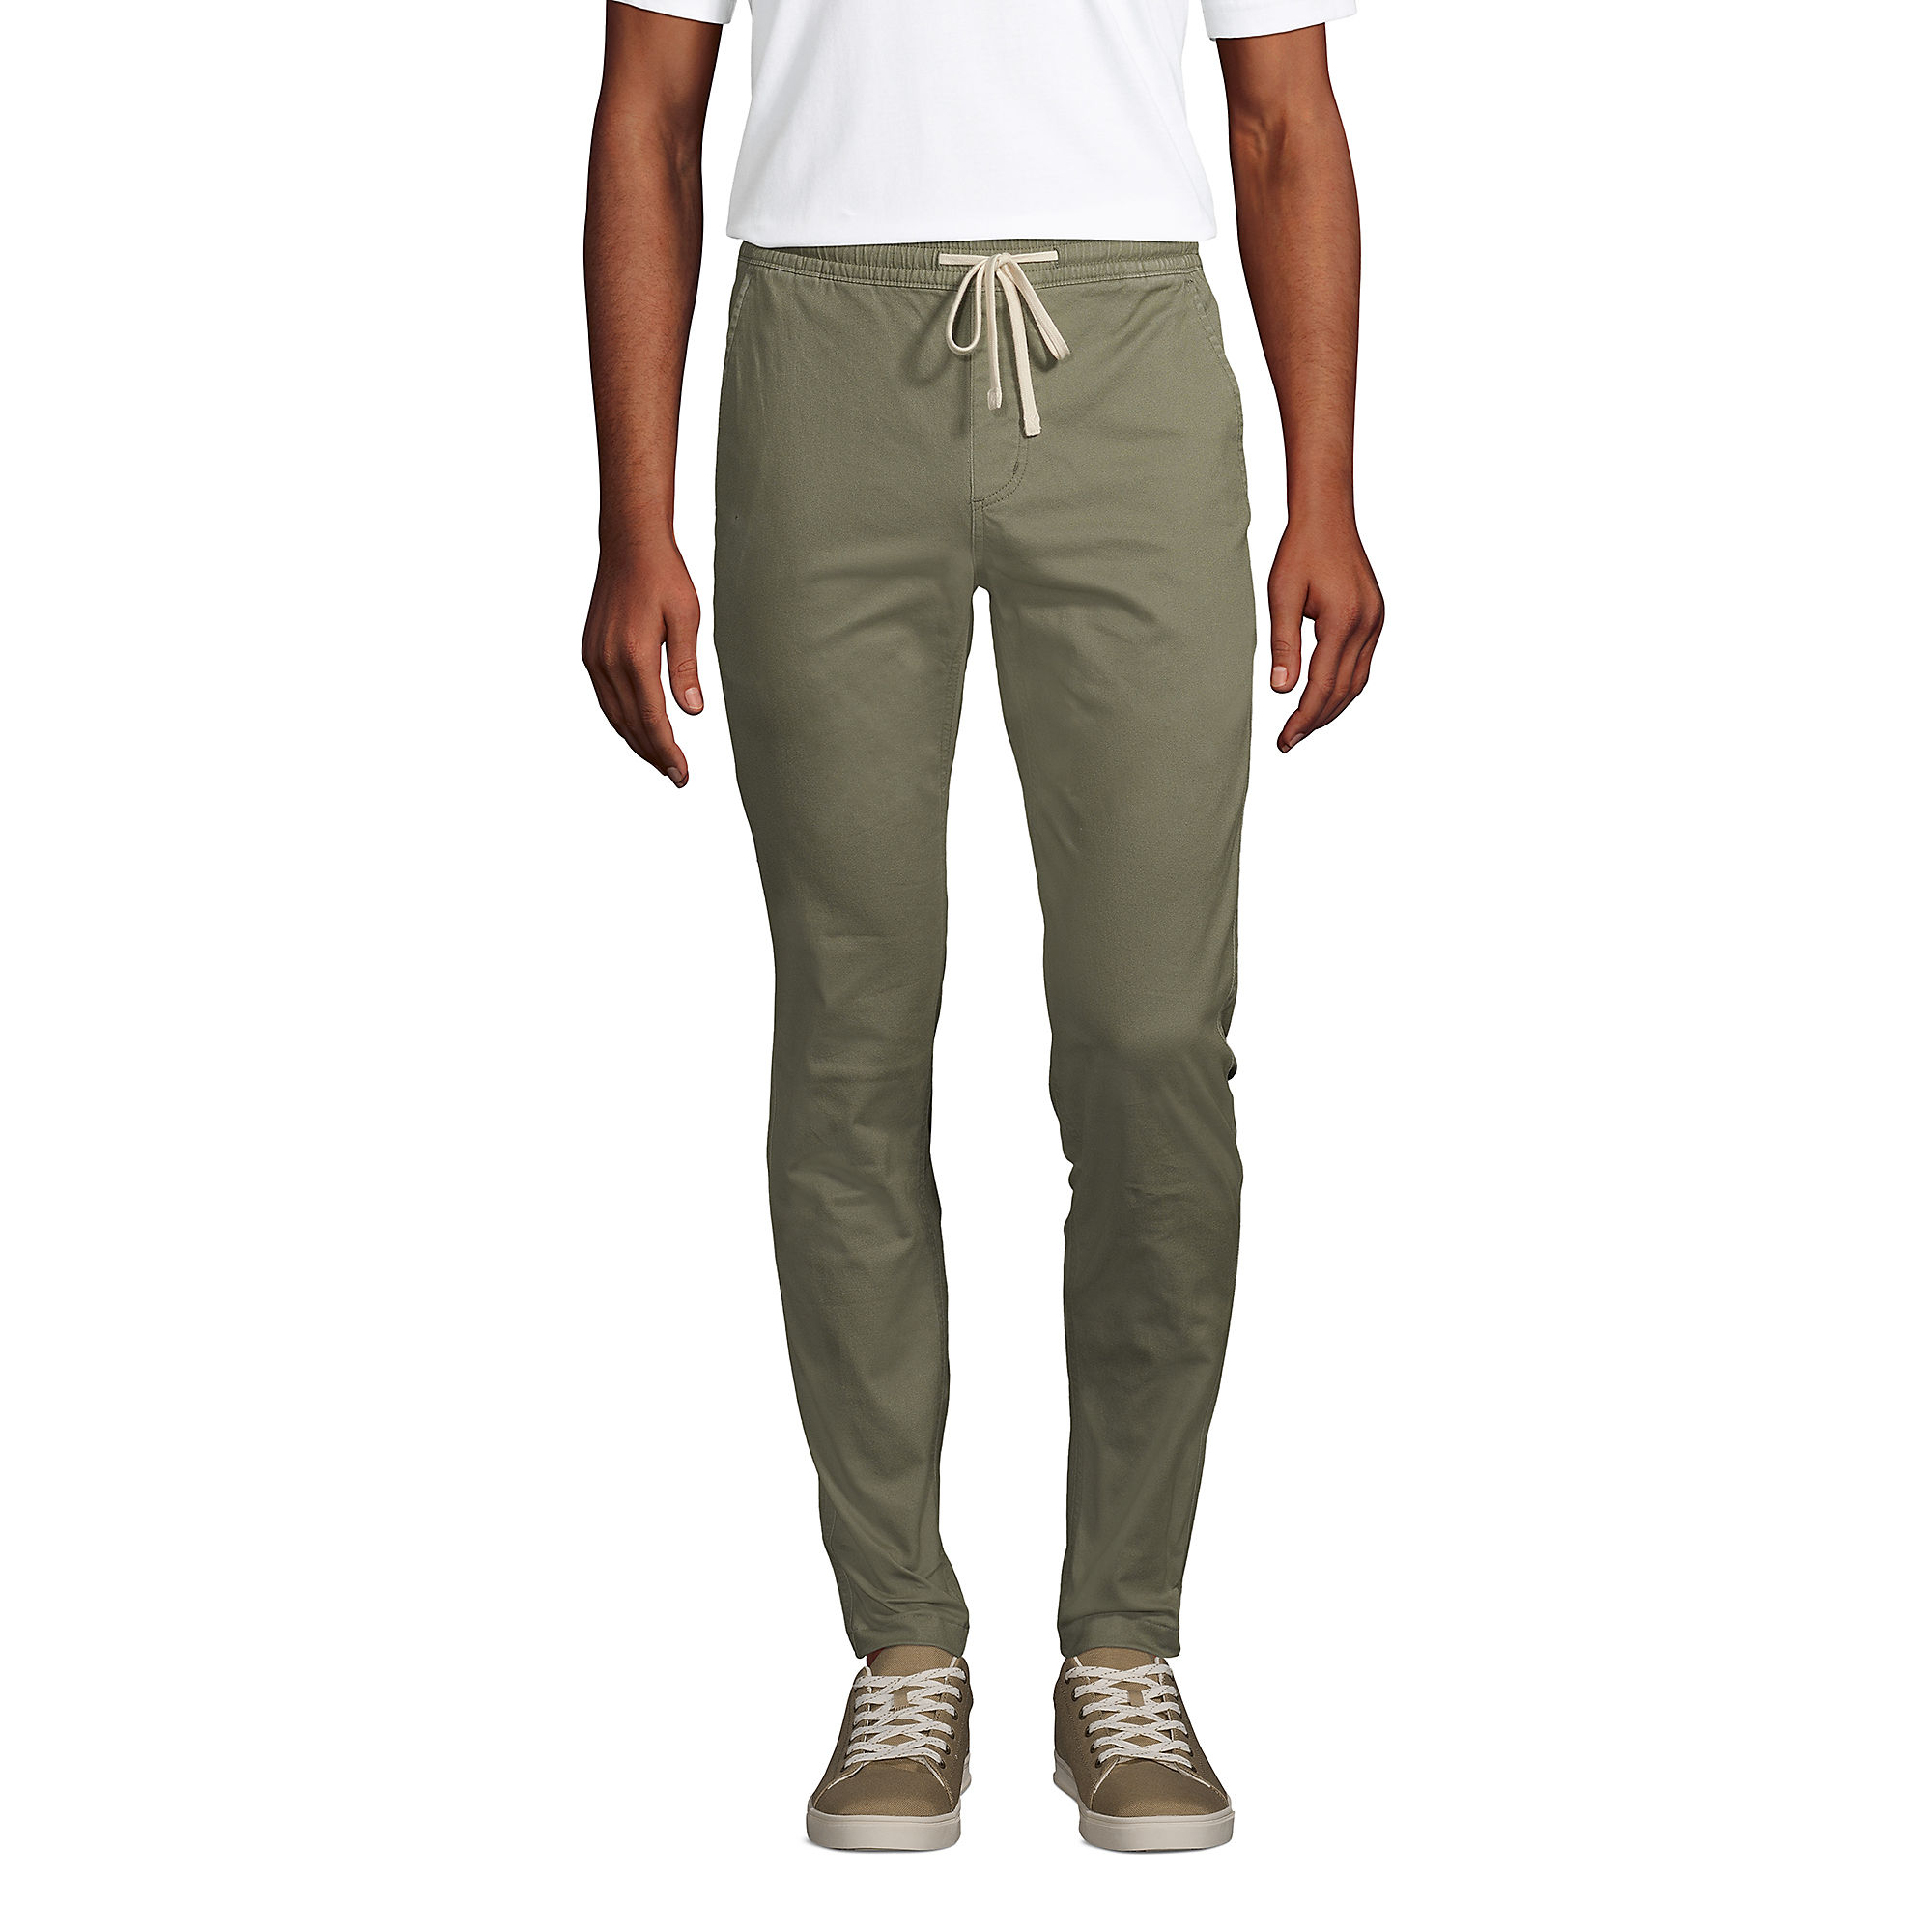 Lands' End Men's Knockabout Pull On Twill Deck Pants (2 colors)